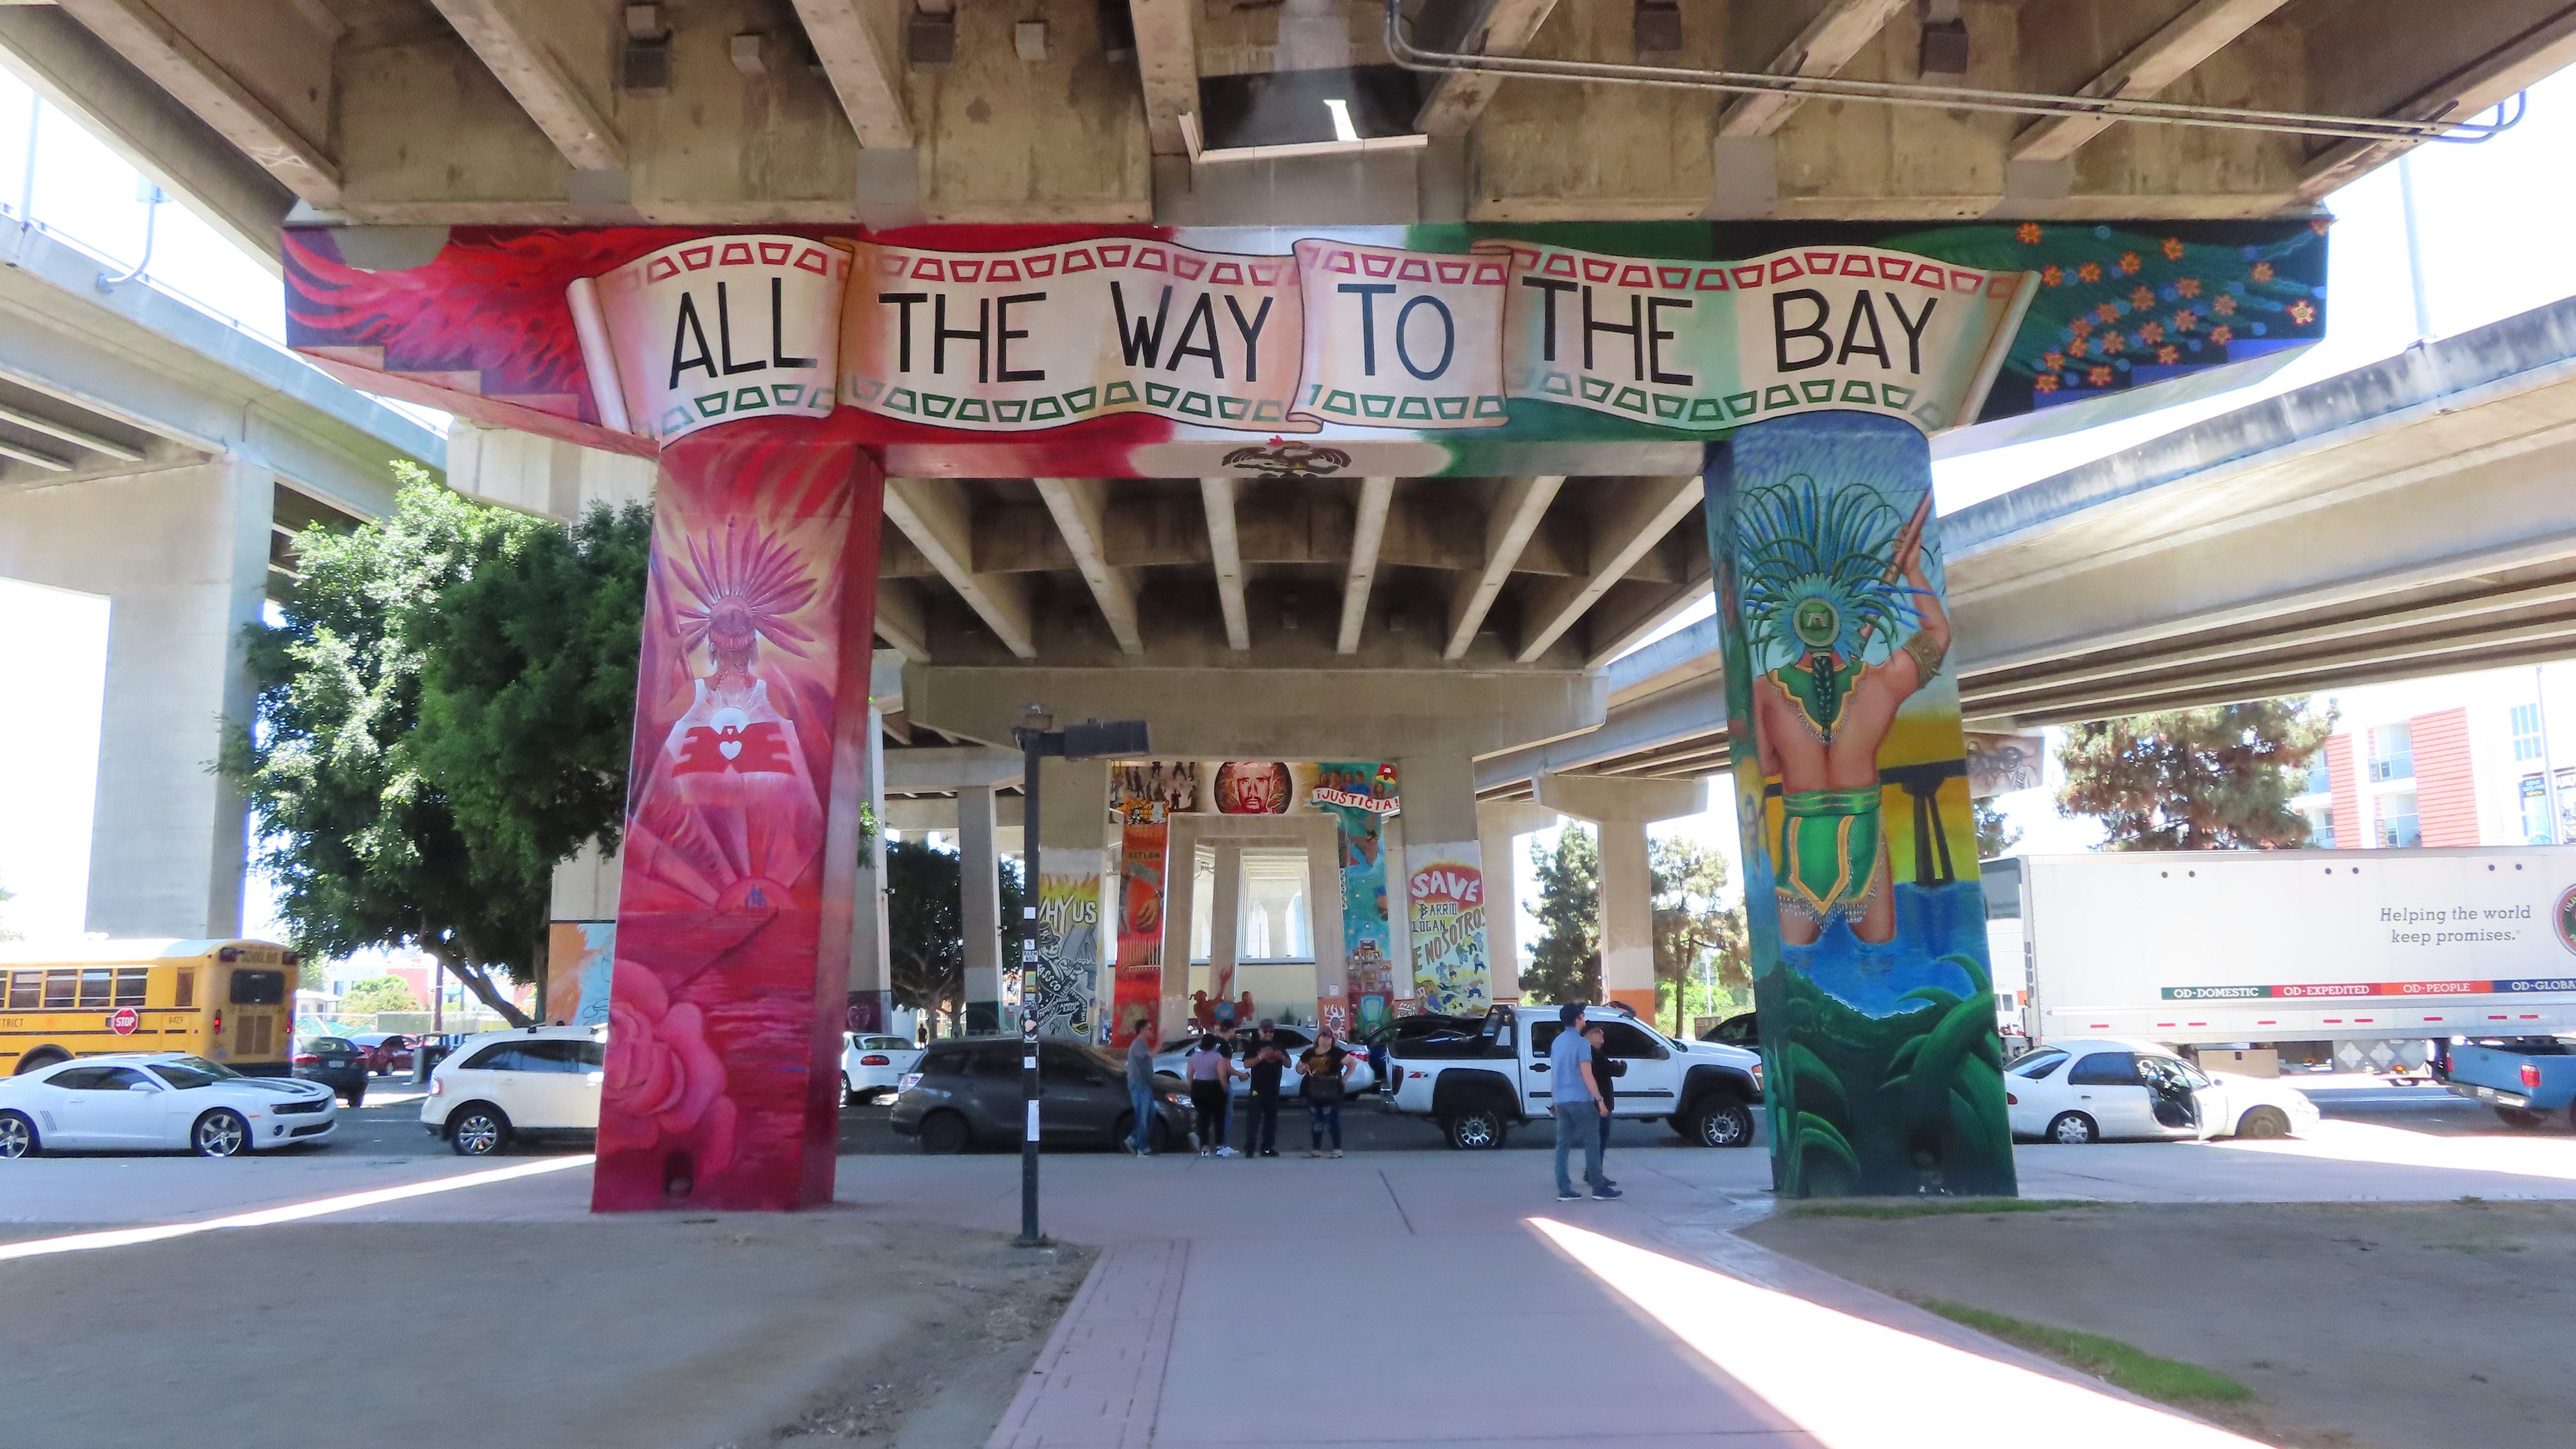 A mural on bridge pylons of the Coronado Bridge in Chicano Park, Barrio Logan. The mural depicts Indigenous gods or warriors overlooking the San Diego Bay and Coronado bridge. One is in more realistic colors and the other pylon depicts the same warrior in shining neon pink. The top says, "All the Way to the Bay" in reference to extending the murals along the bridge pylons to the edge of the San Diego Naval Base along the water.